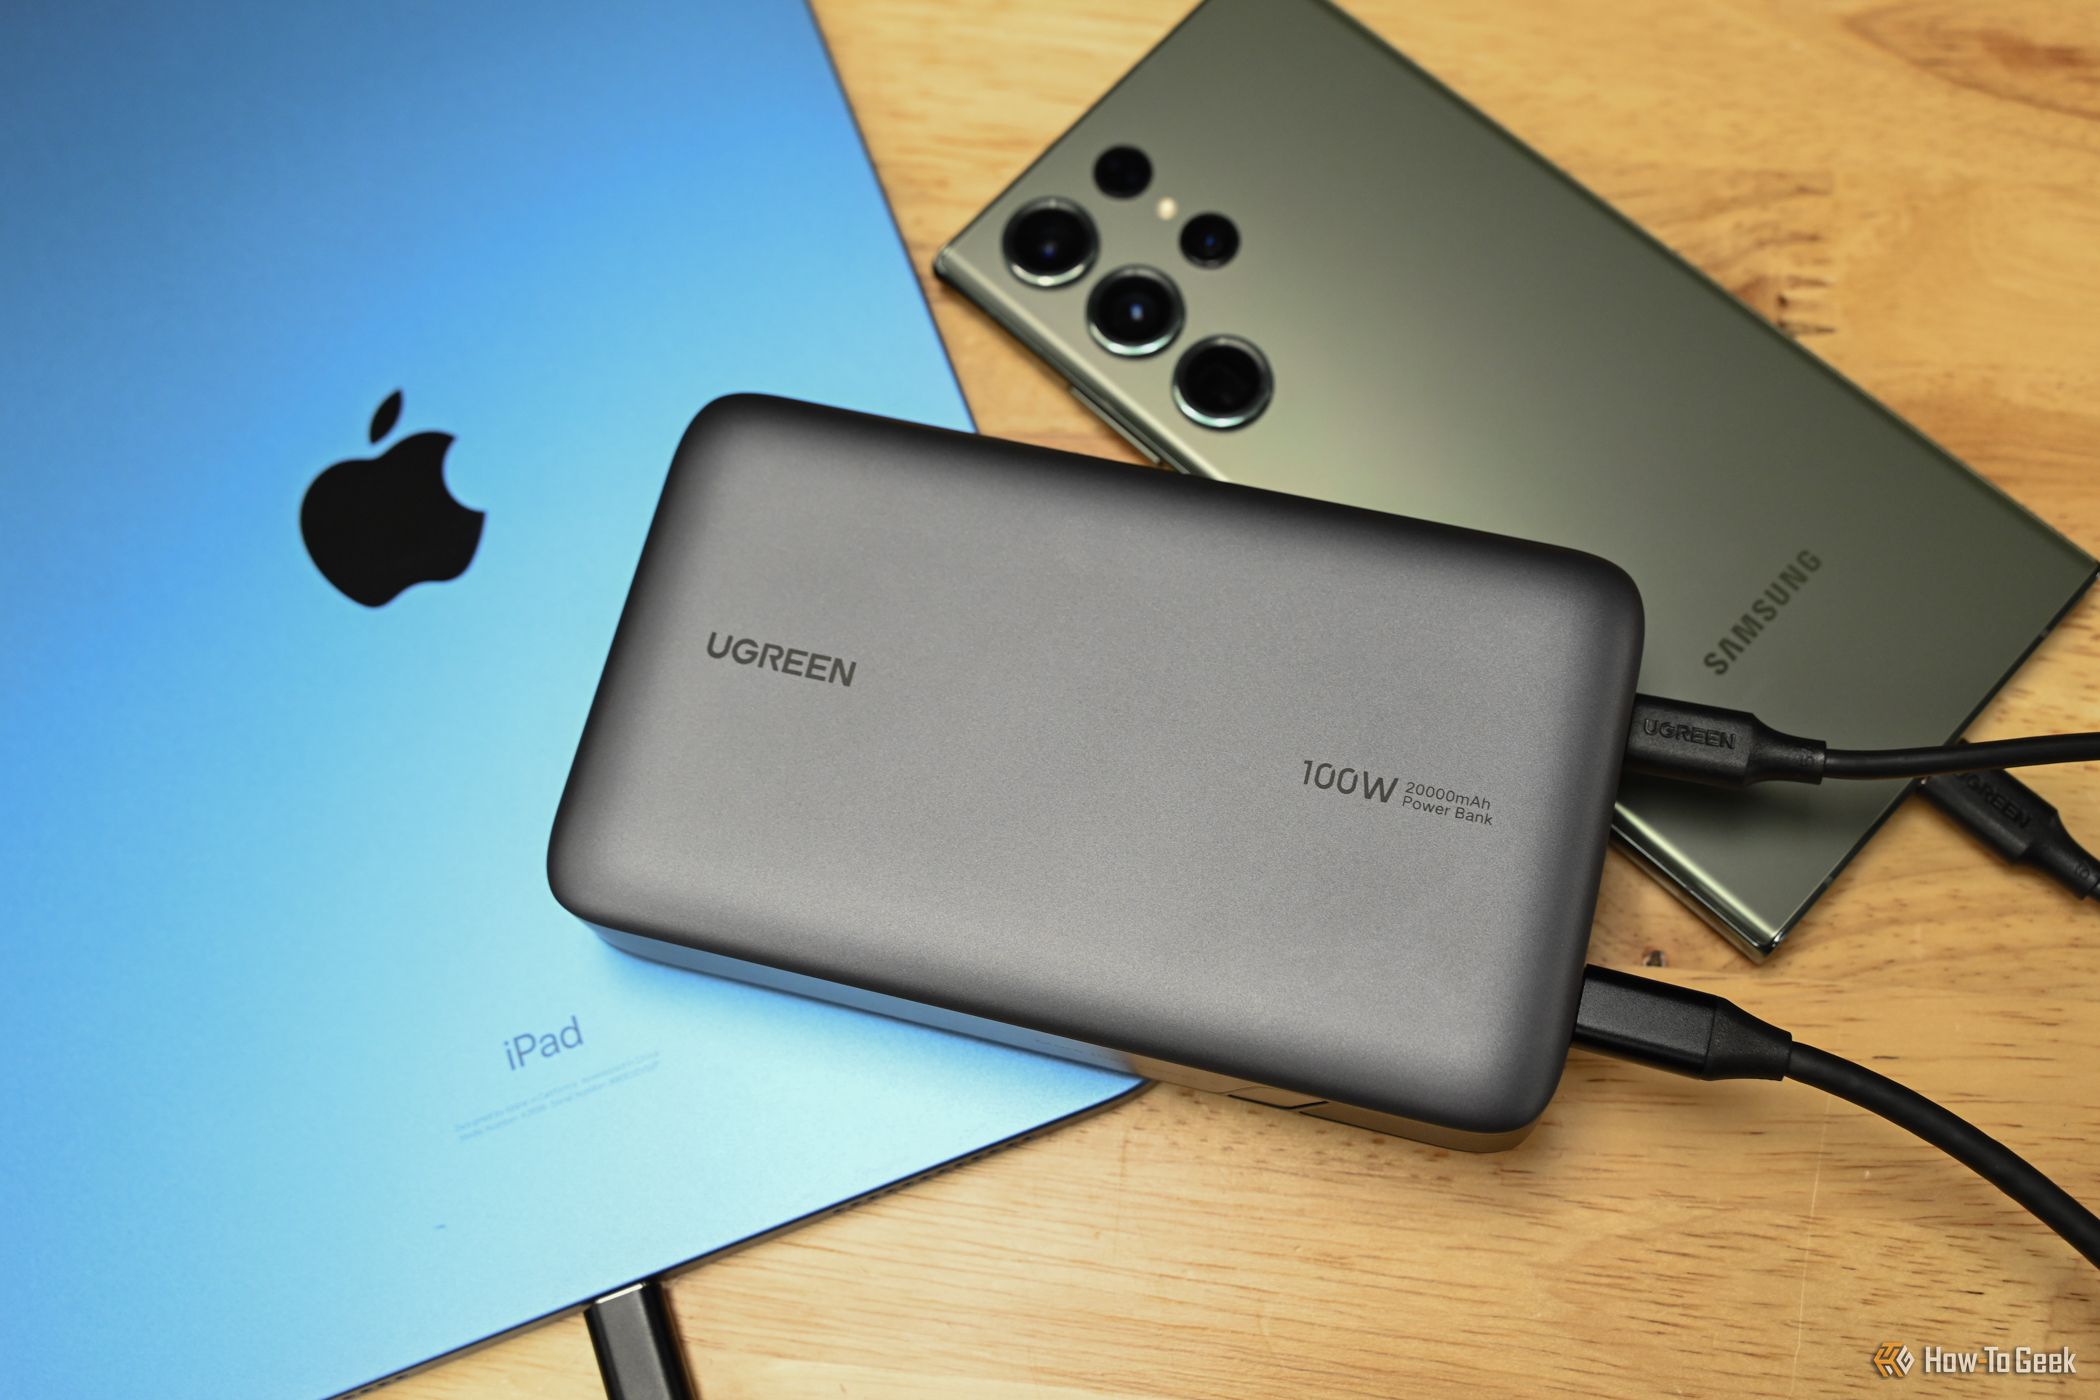 Charging a Samsung phone and an iPad with the Ugreen 20,000mAh Two-Way Fast Charging Power Bank